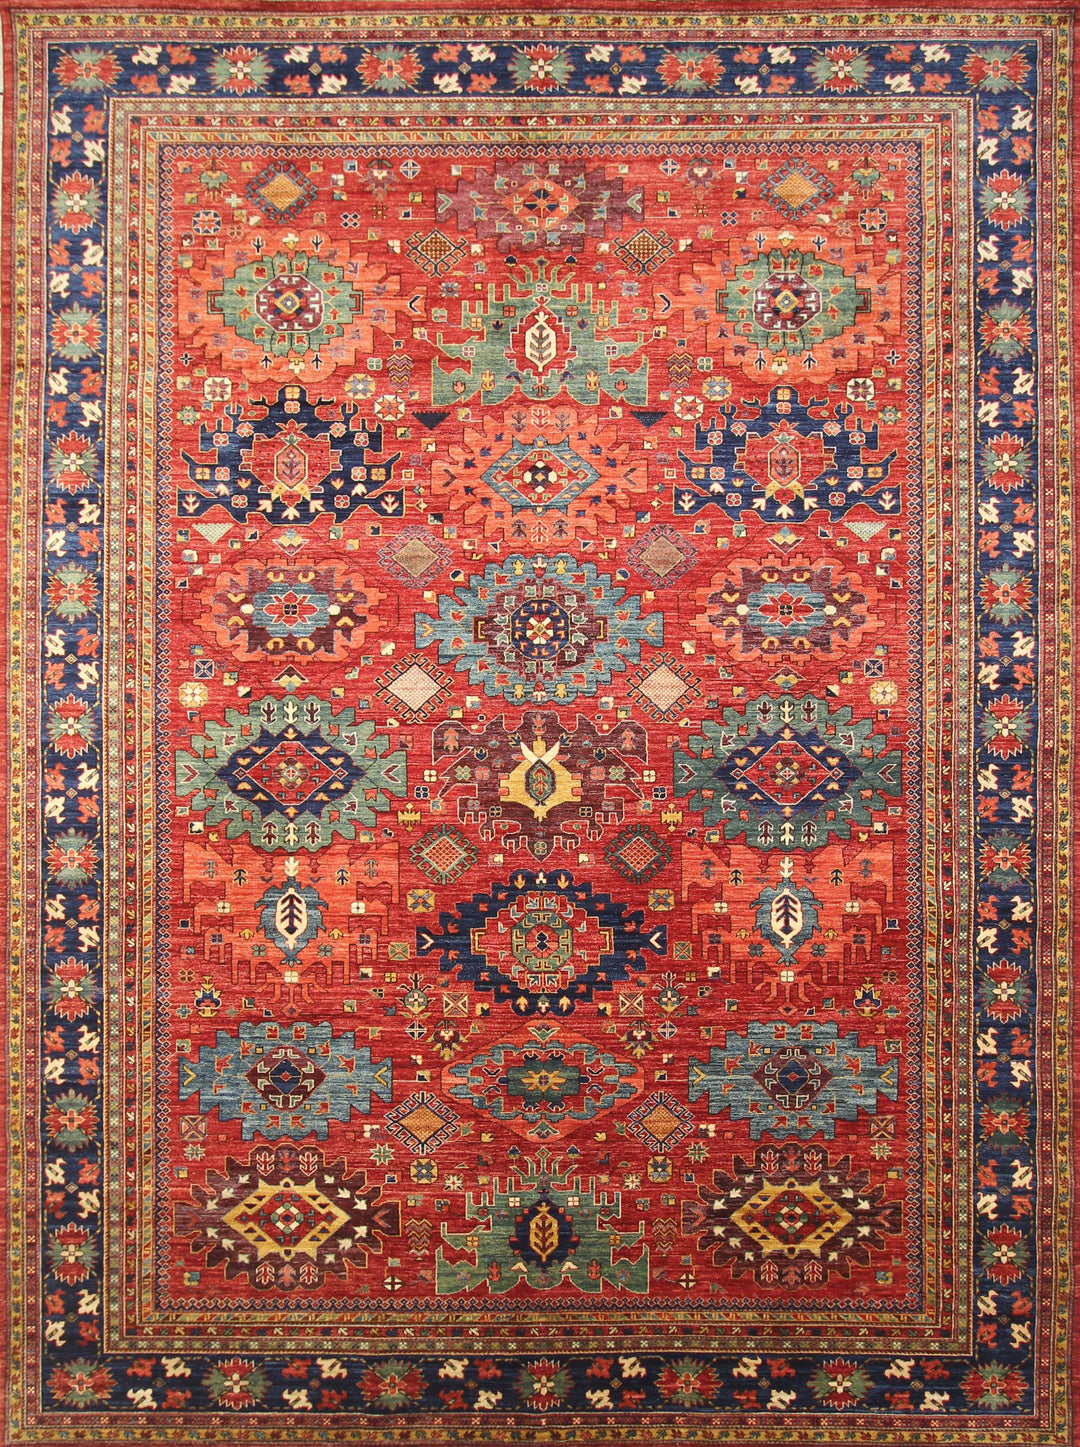 SOLD 10x14 Baluch Red Blue Persian Hand knotted Wool Oriental Area Rug - Yildiz Rugs